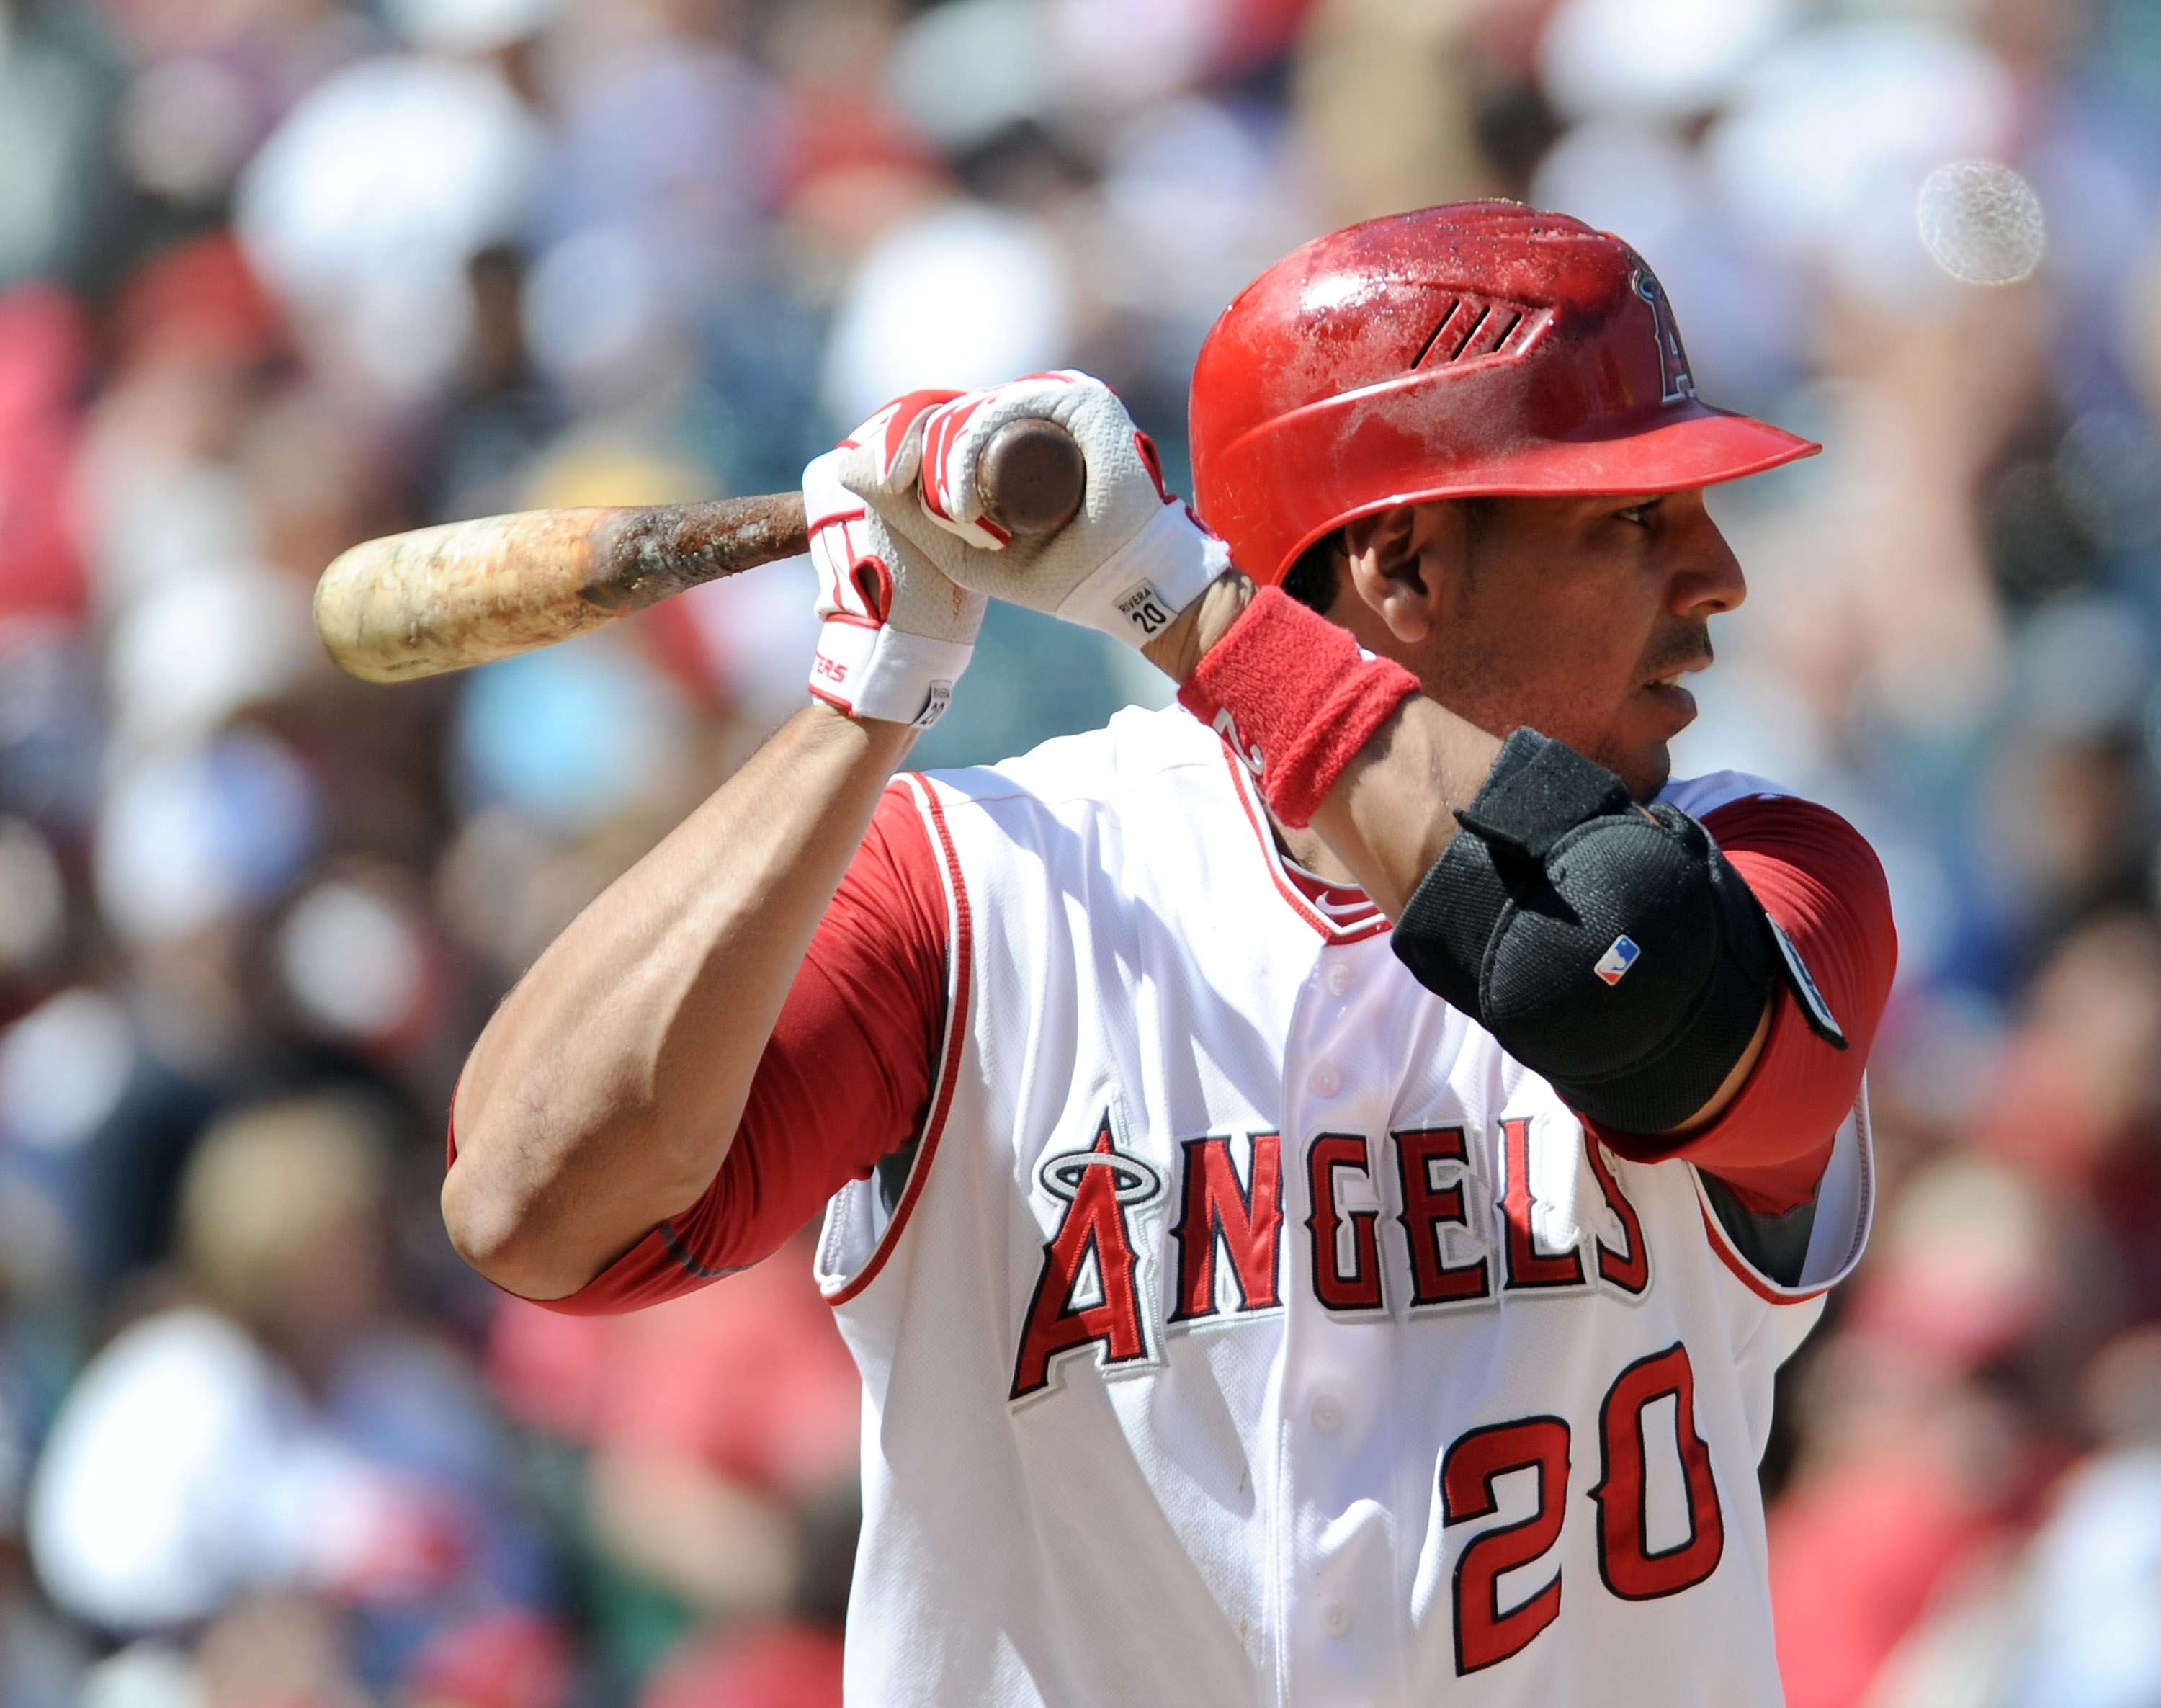 ANAHEIM, CA - SEPTEMBER 12:  Juan Rivera #20 of the Los Angeles Angels of Anaheim at bat against the Seattle Mariners during the game at Angel Stadium on September 12, 2010 in Anaheim, California.  (Photo by Harry How/Getty Images)